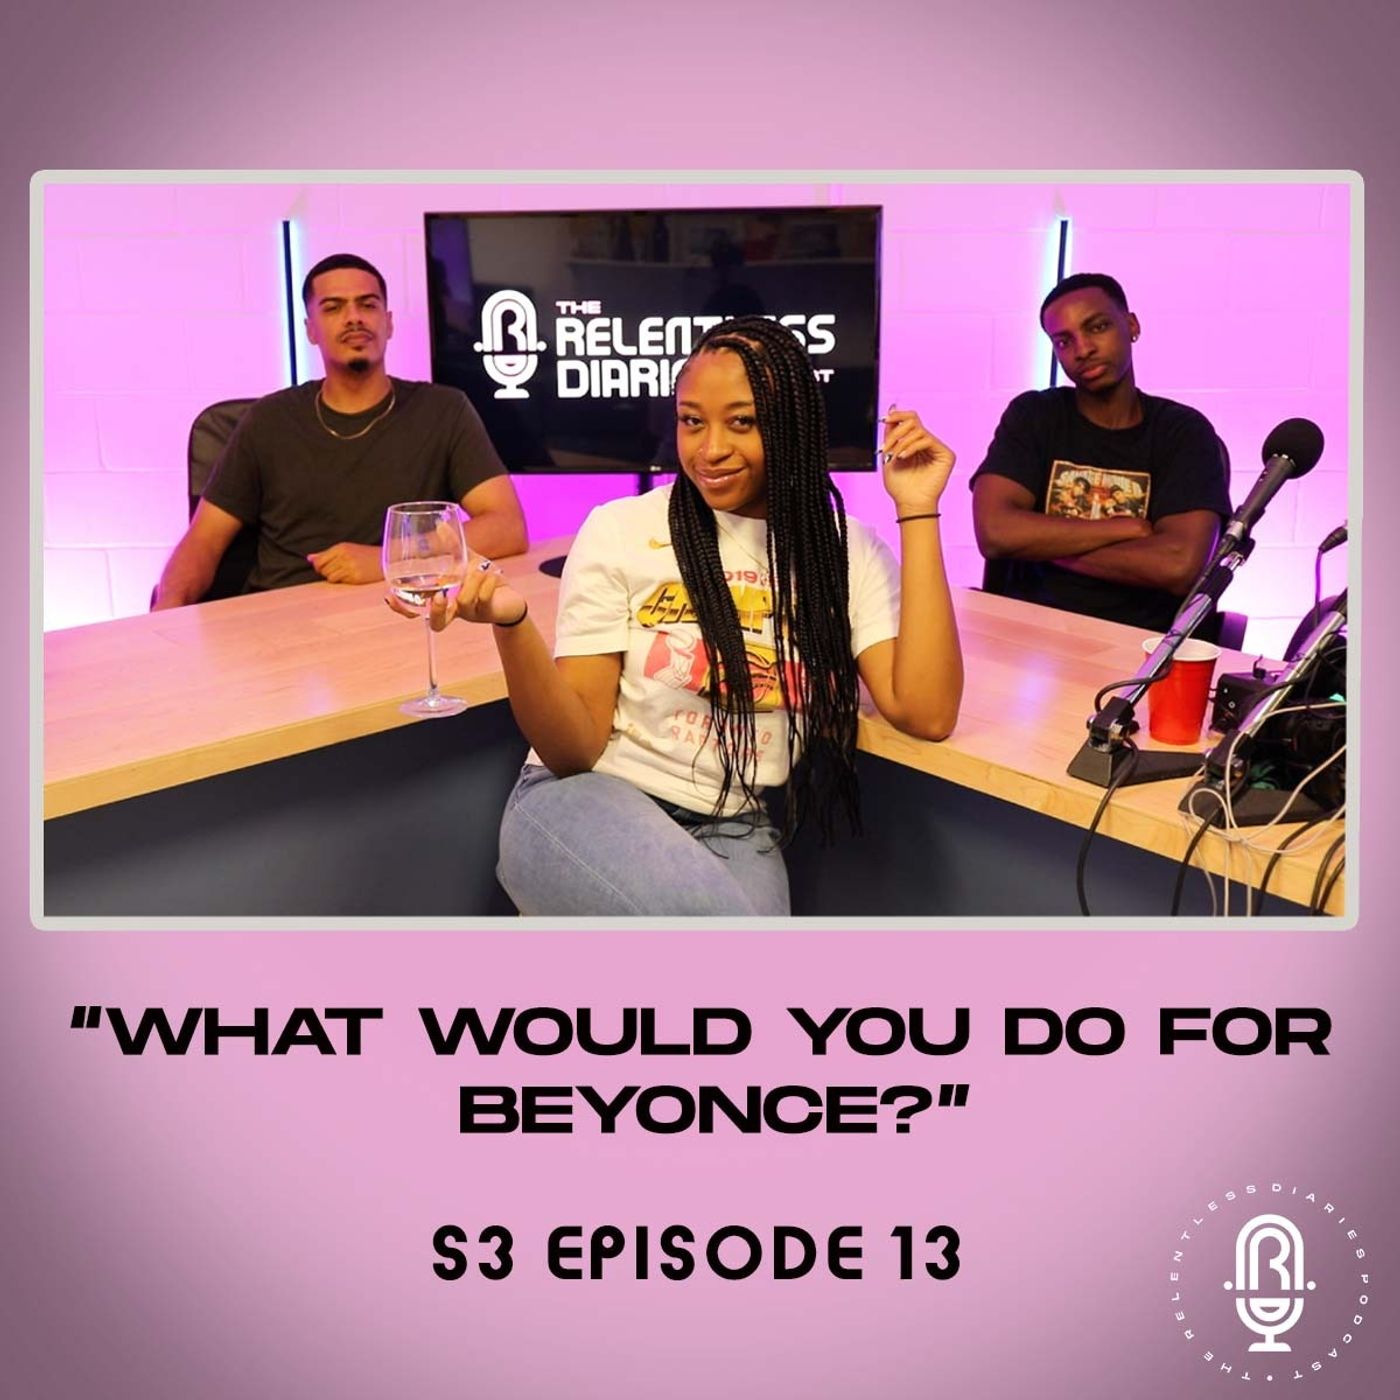 What Would You Do For Beyonce?